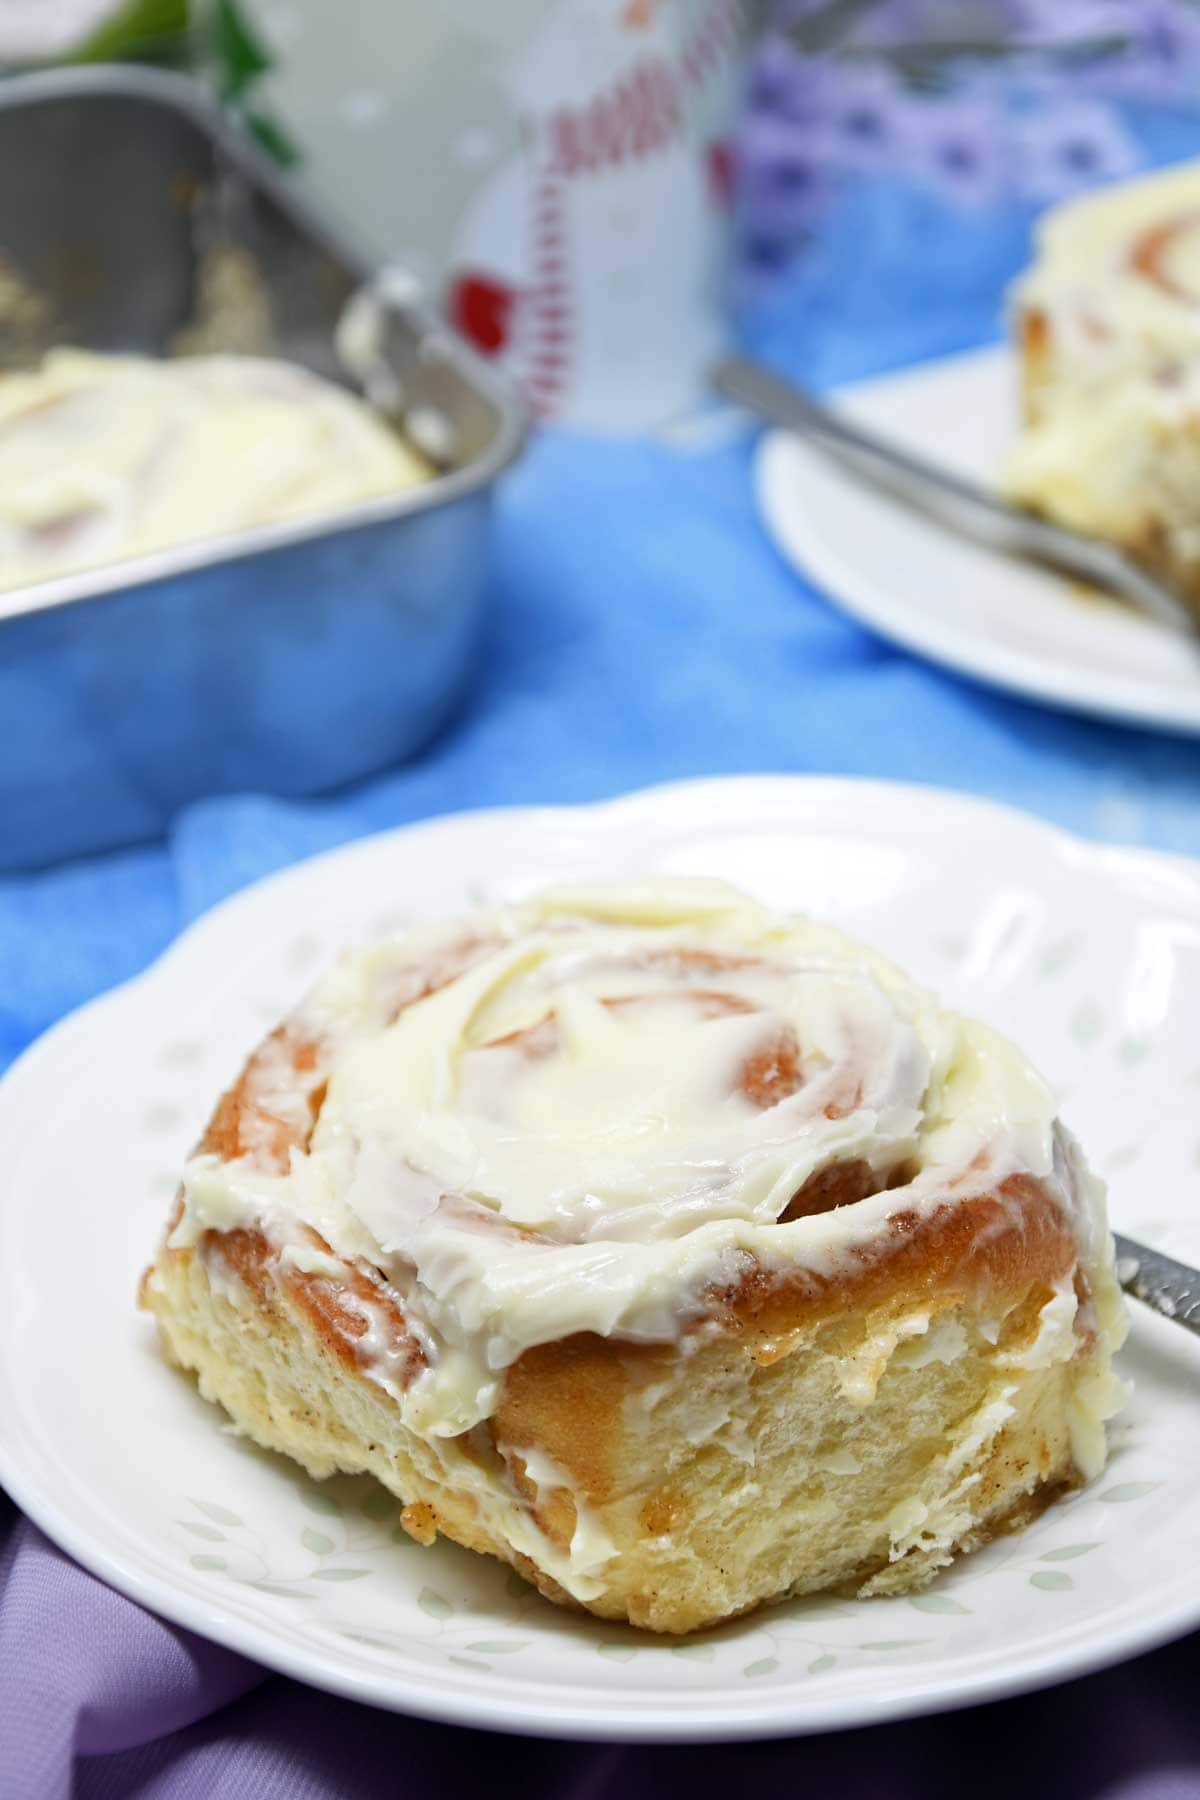 Cinnamon Roll served in a plate.